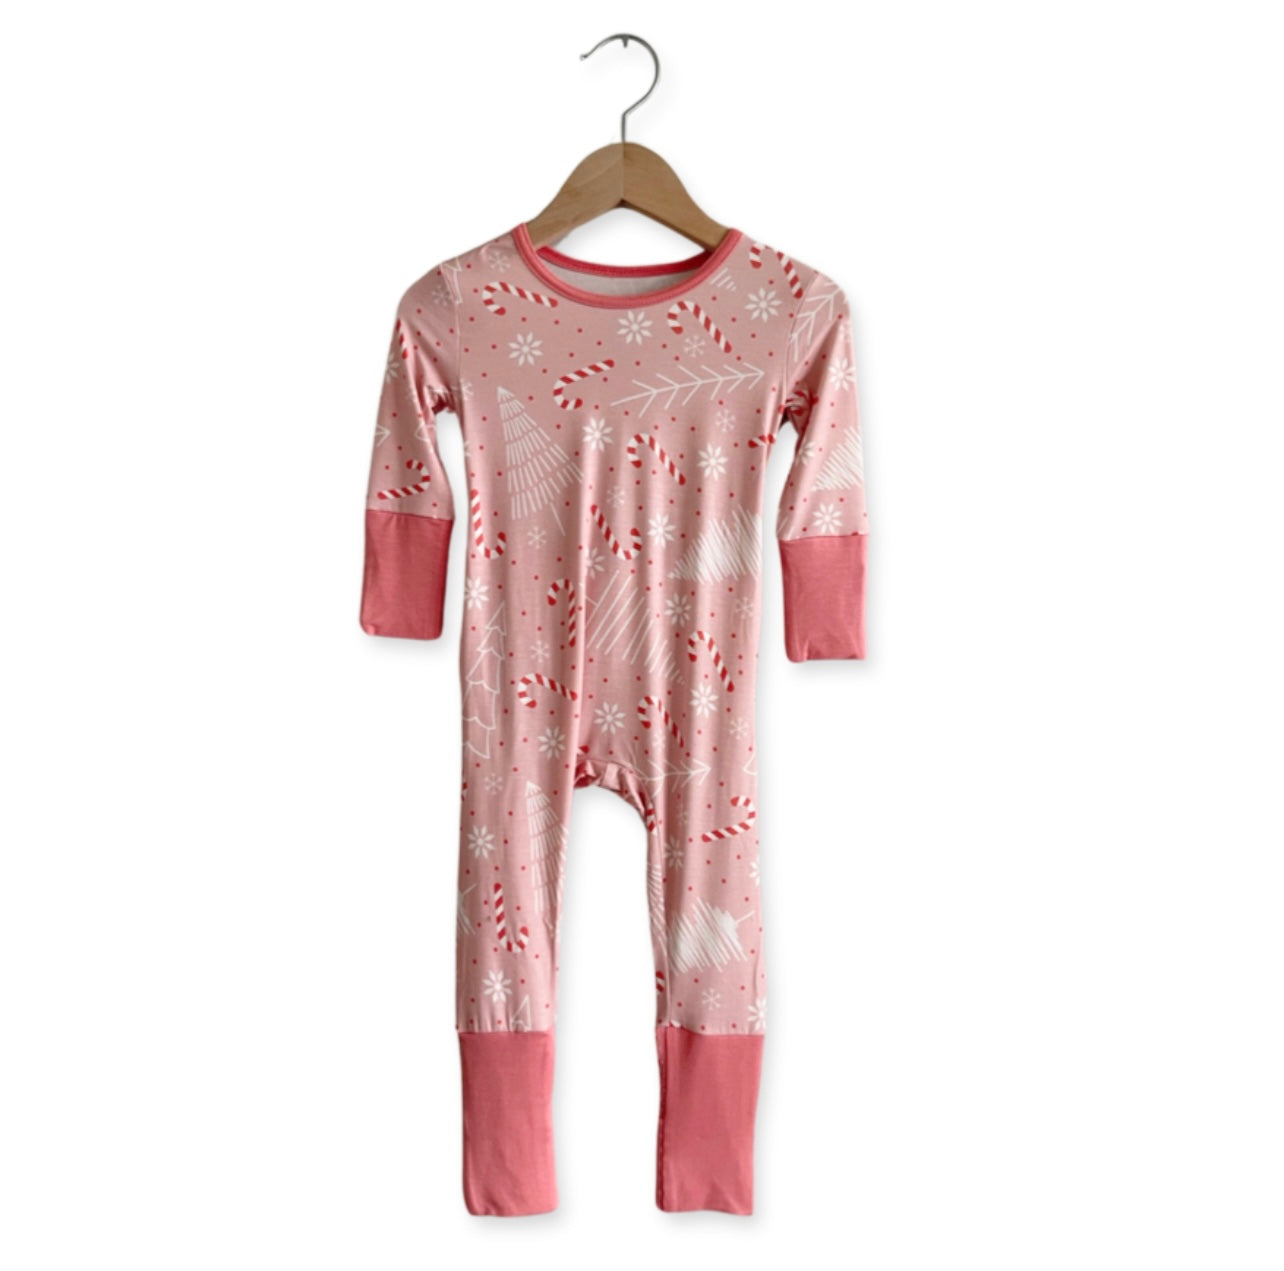 Candy Cane Lane At Your Leisure Essential Adult Romper